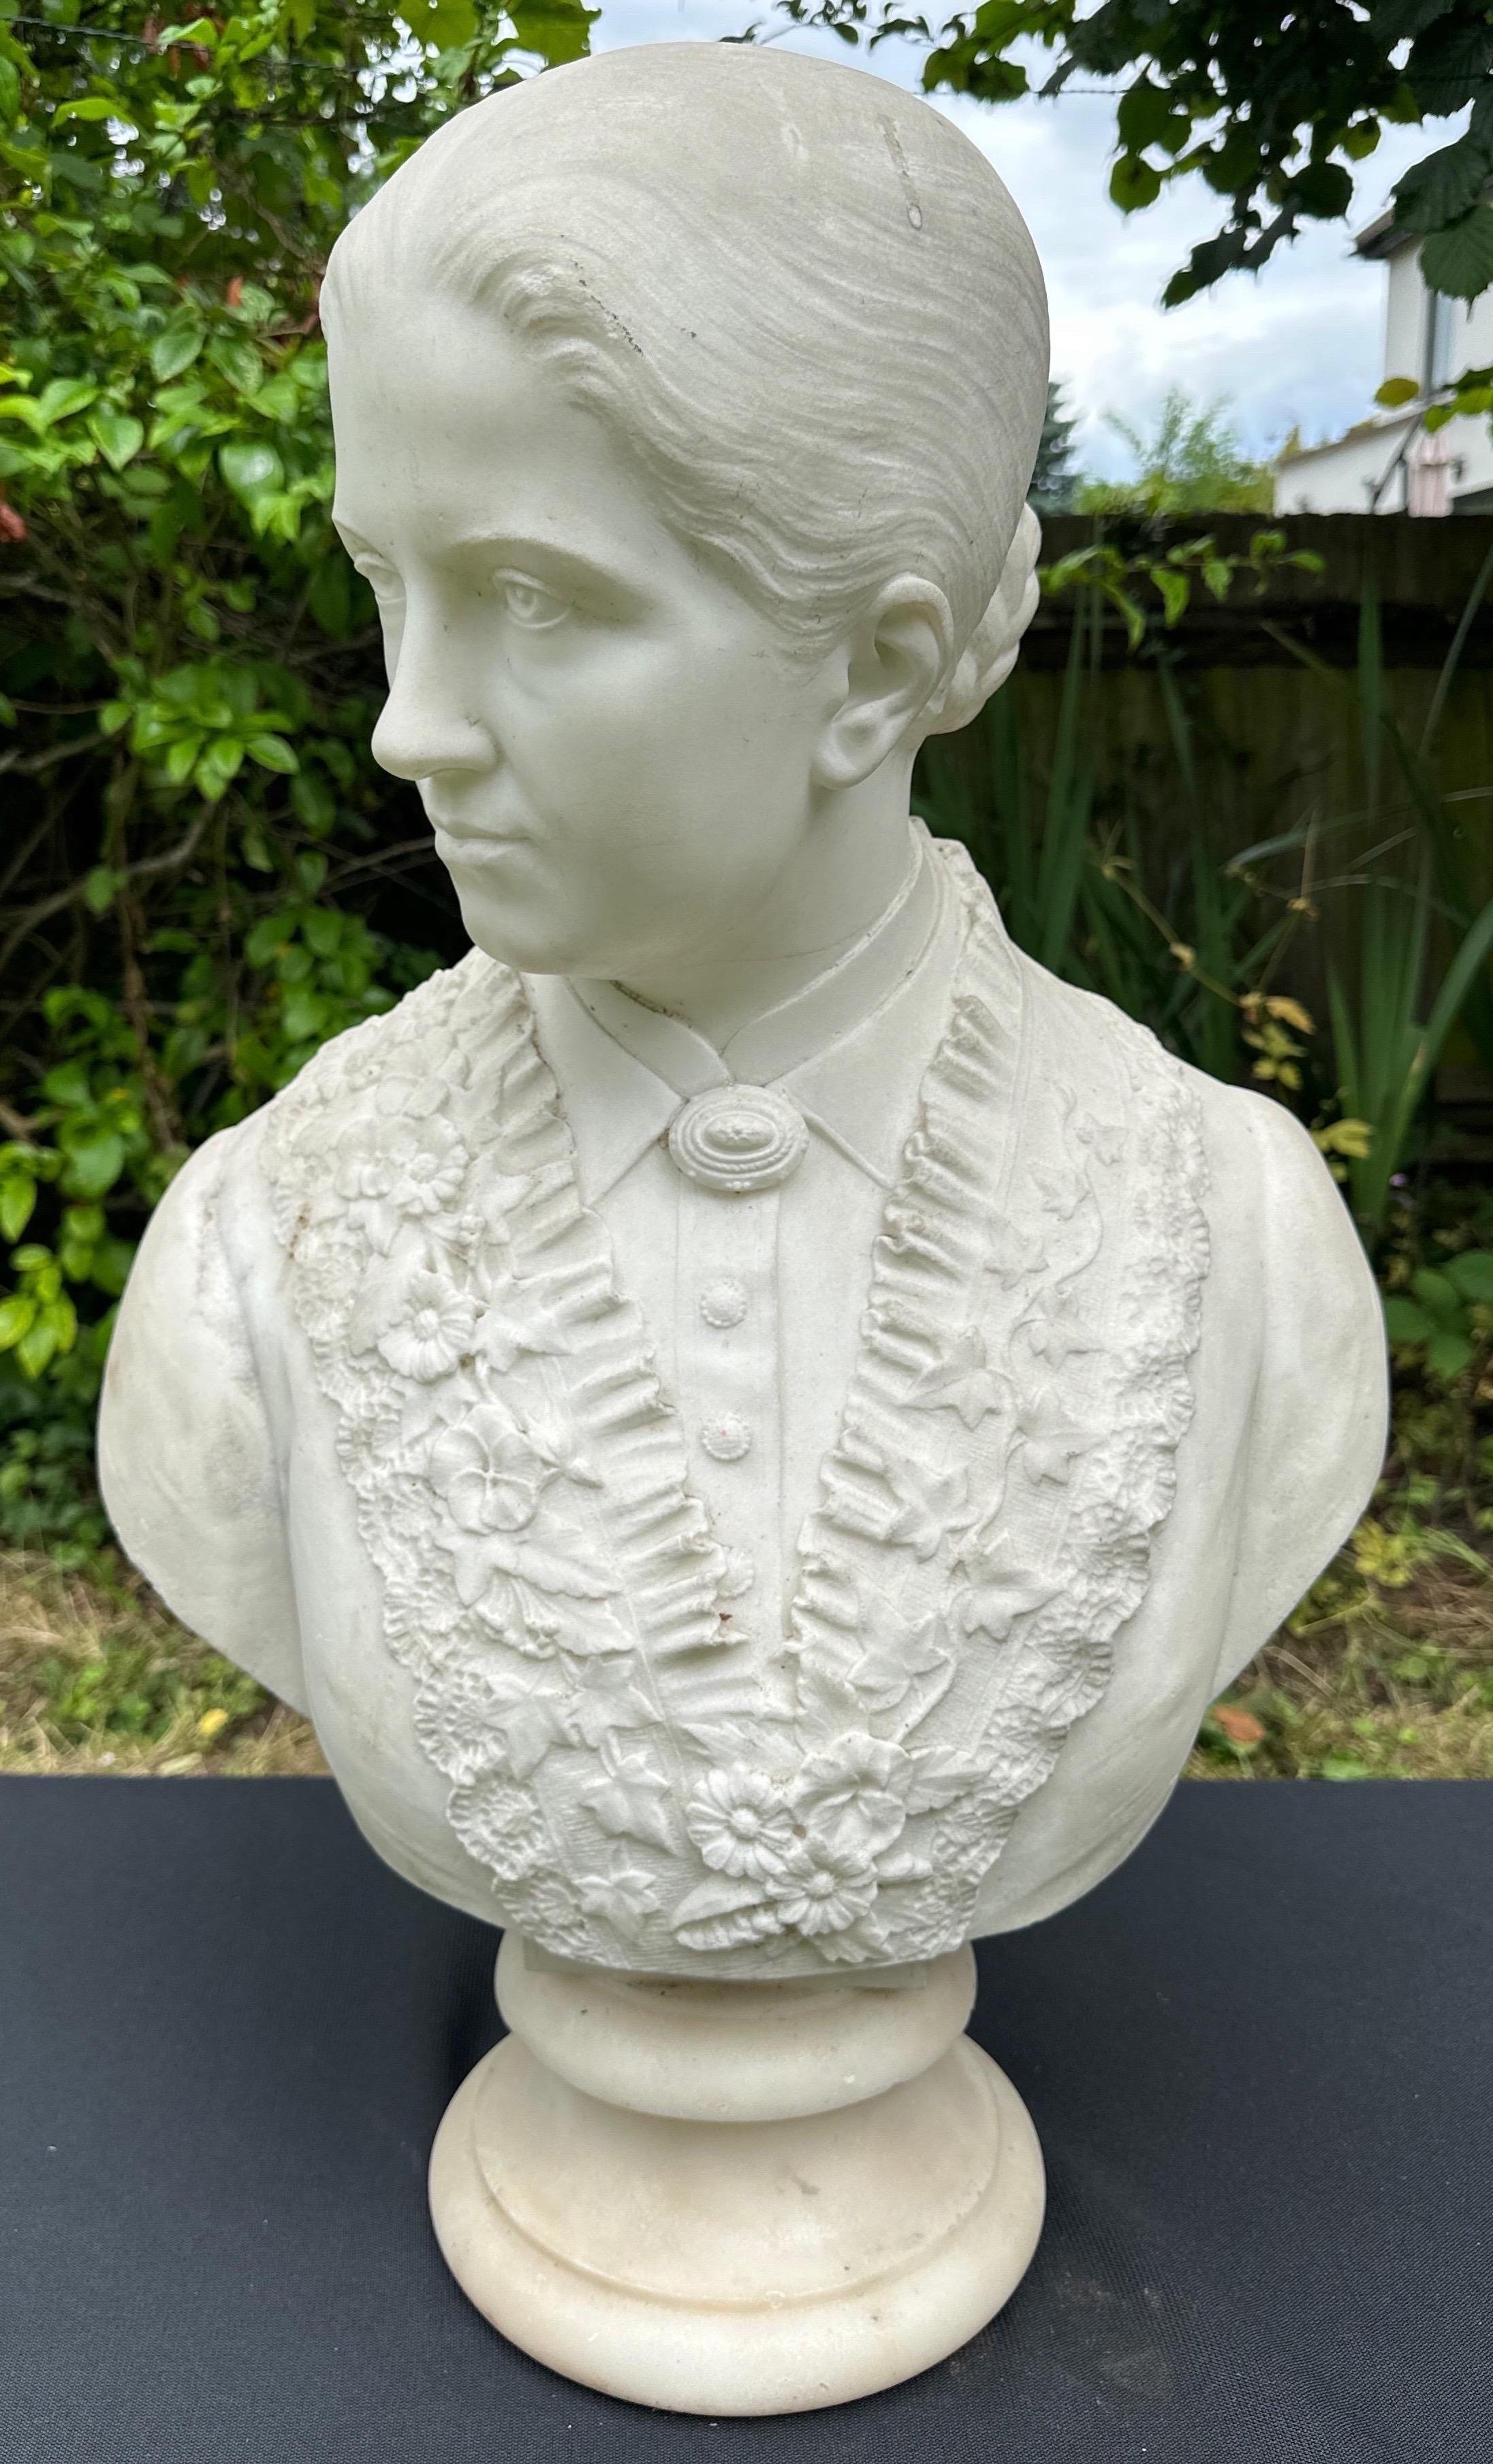 A white marble bust of an elegant lady with her hair in a bun. Wearing a floral embroidered flowery dress. 
Sitting on a white marble circular base.